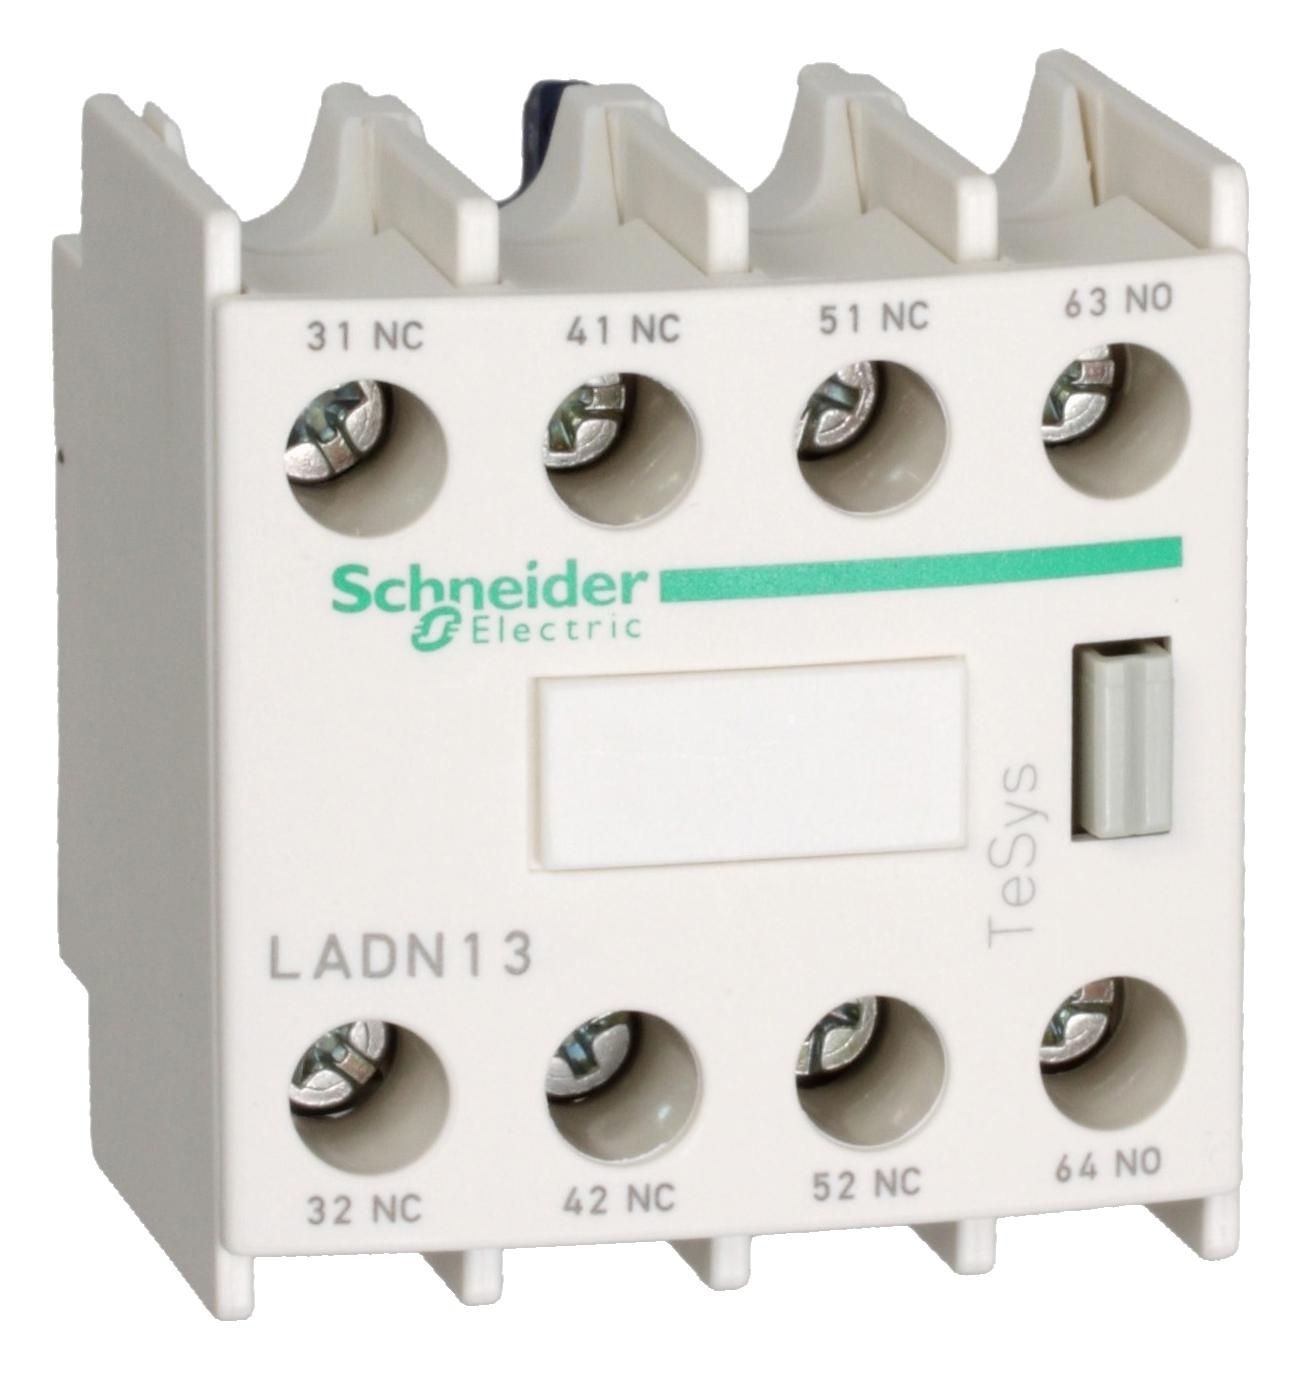 LADN226 AUXILIARY CONTACT BLOCK, 2NO/2NC SCHNEIDER ELECTRIC